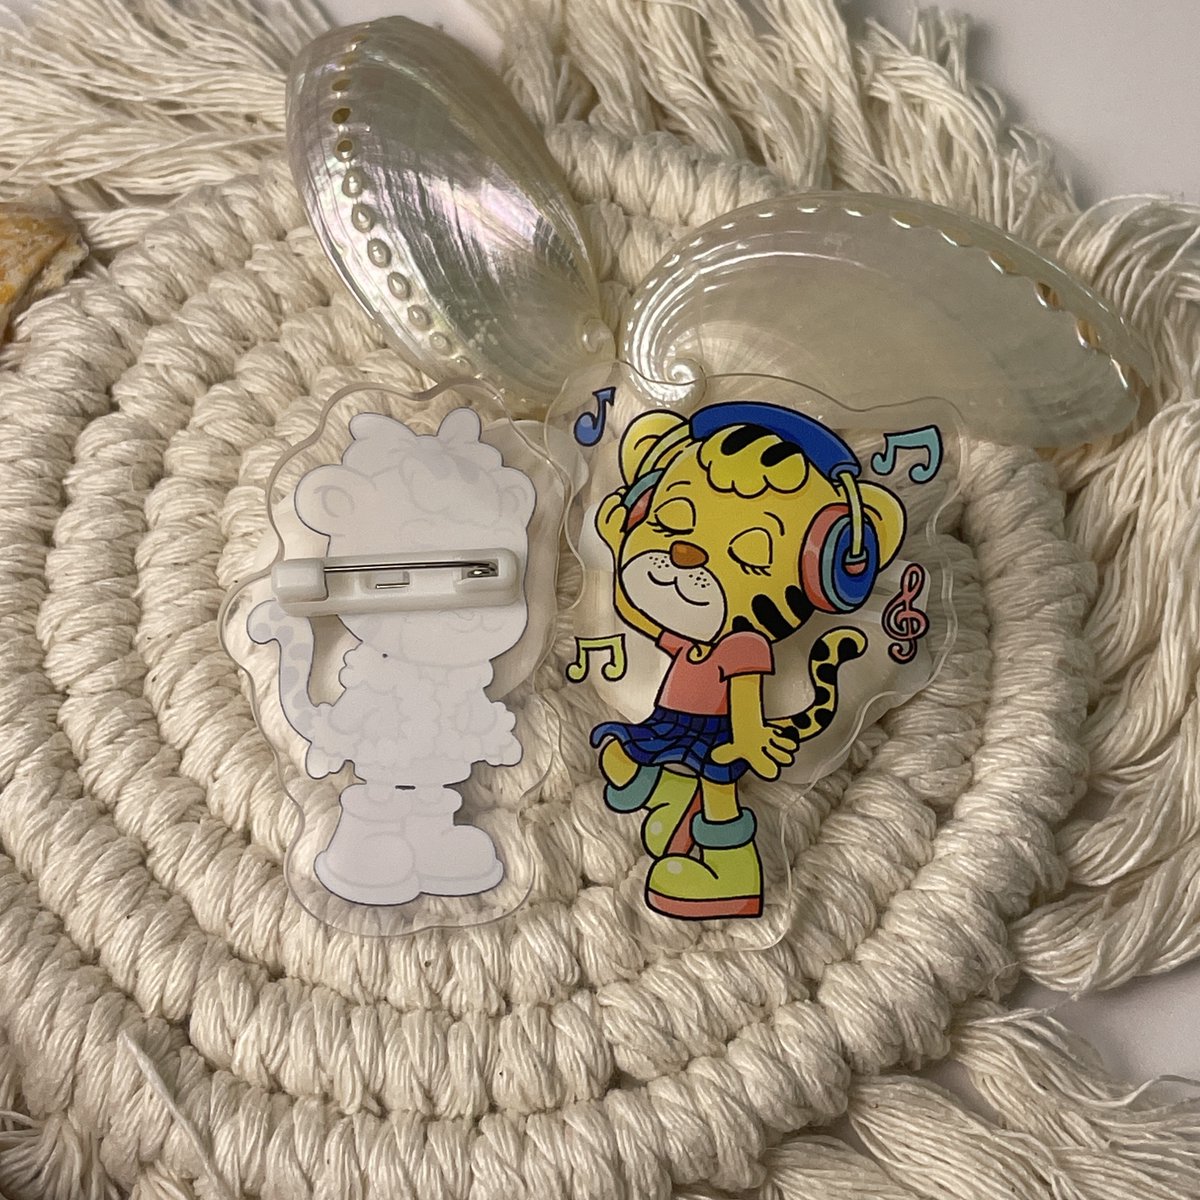 Cute acrylic pins, the shape and image all can be customed. 

Do you have a lovely little stuff to ornament your bags?

#pins #badges #acrylicpins #acrylicbadges #cutepins #kawaiipins #cutetiger #custombadges #custompins #animepins #animebadges #cutearts #anime